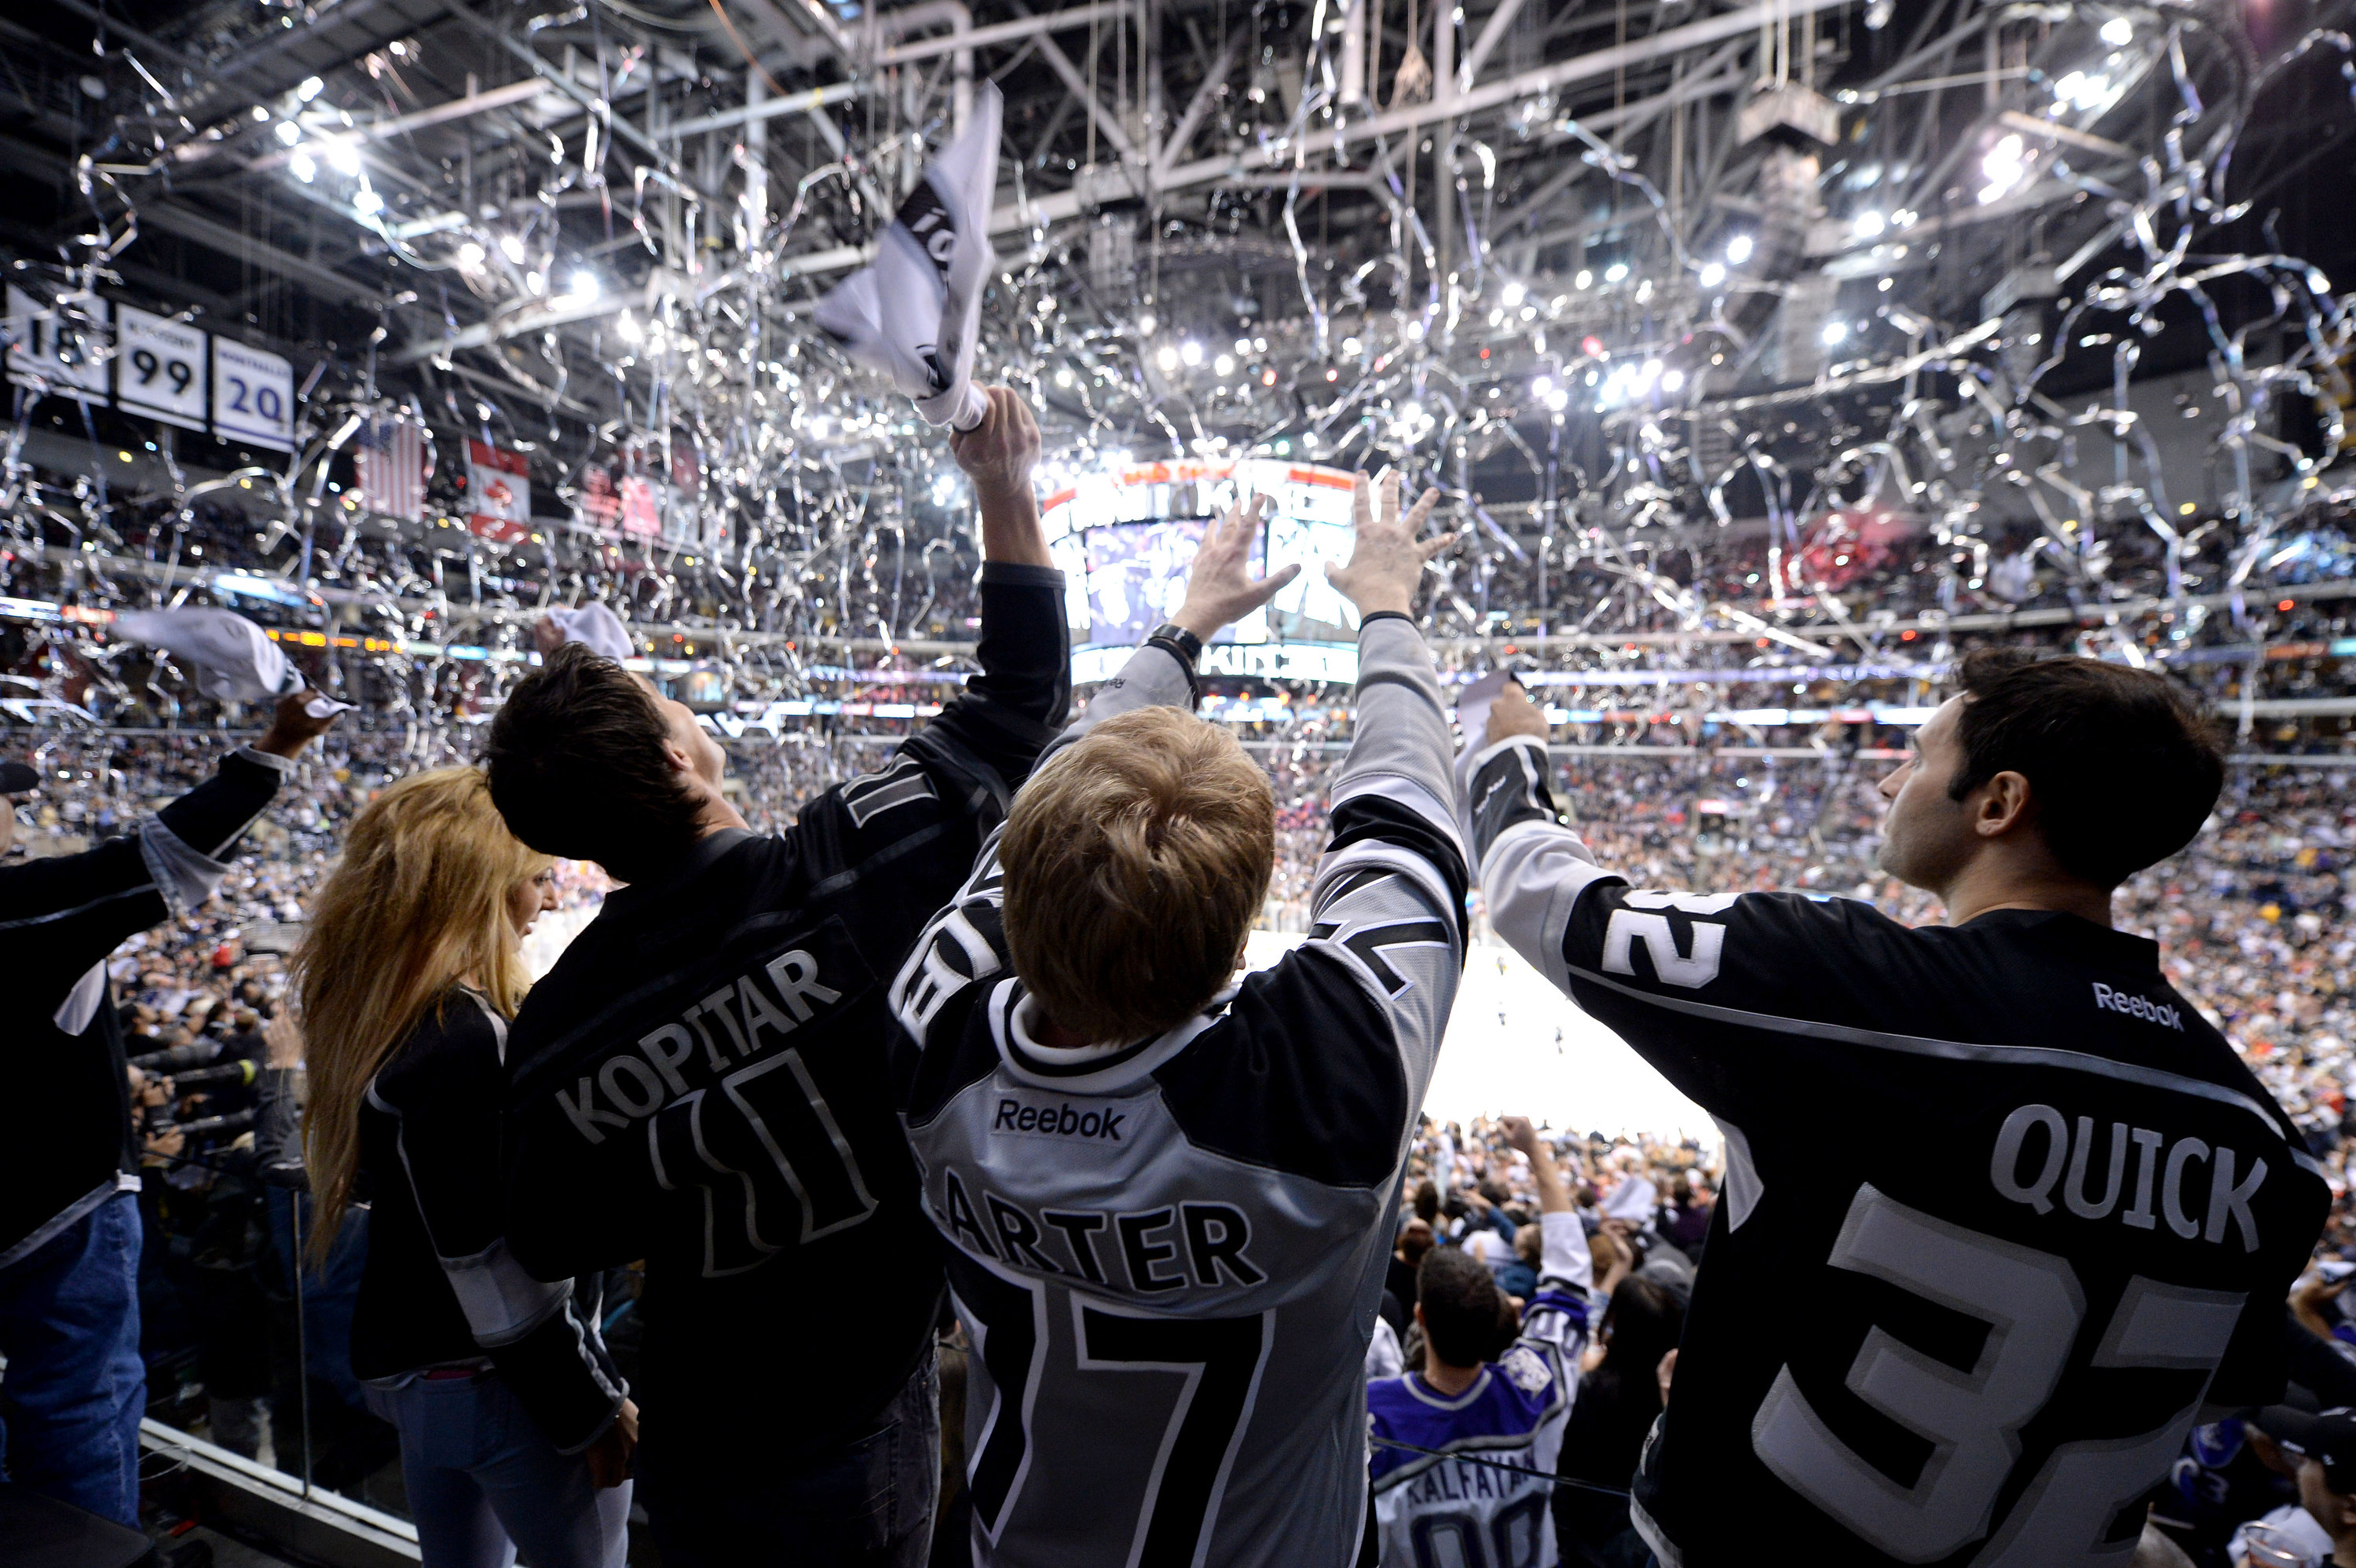 Tickets For All Kings 201415 Regular Season Games At Staples Center To